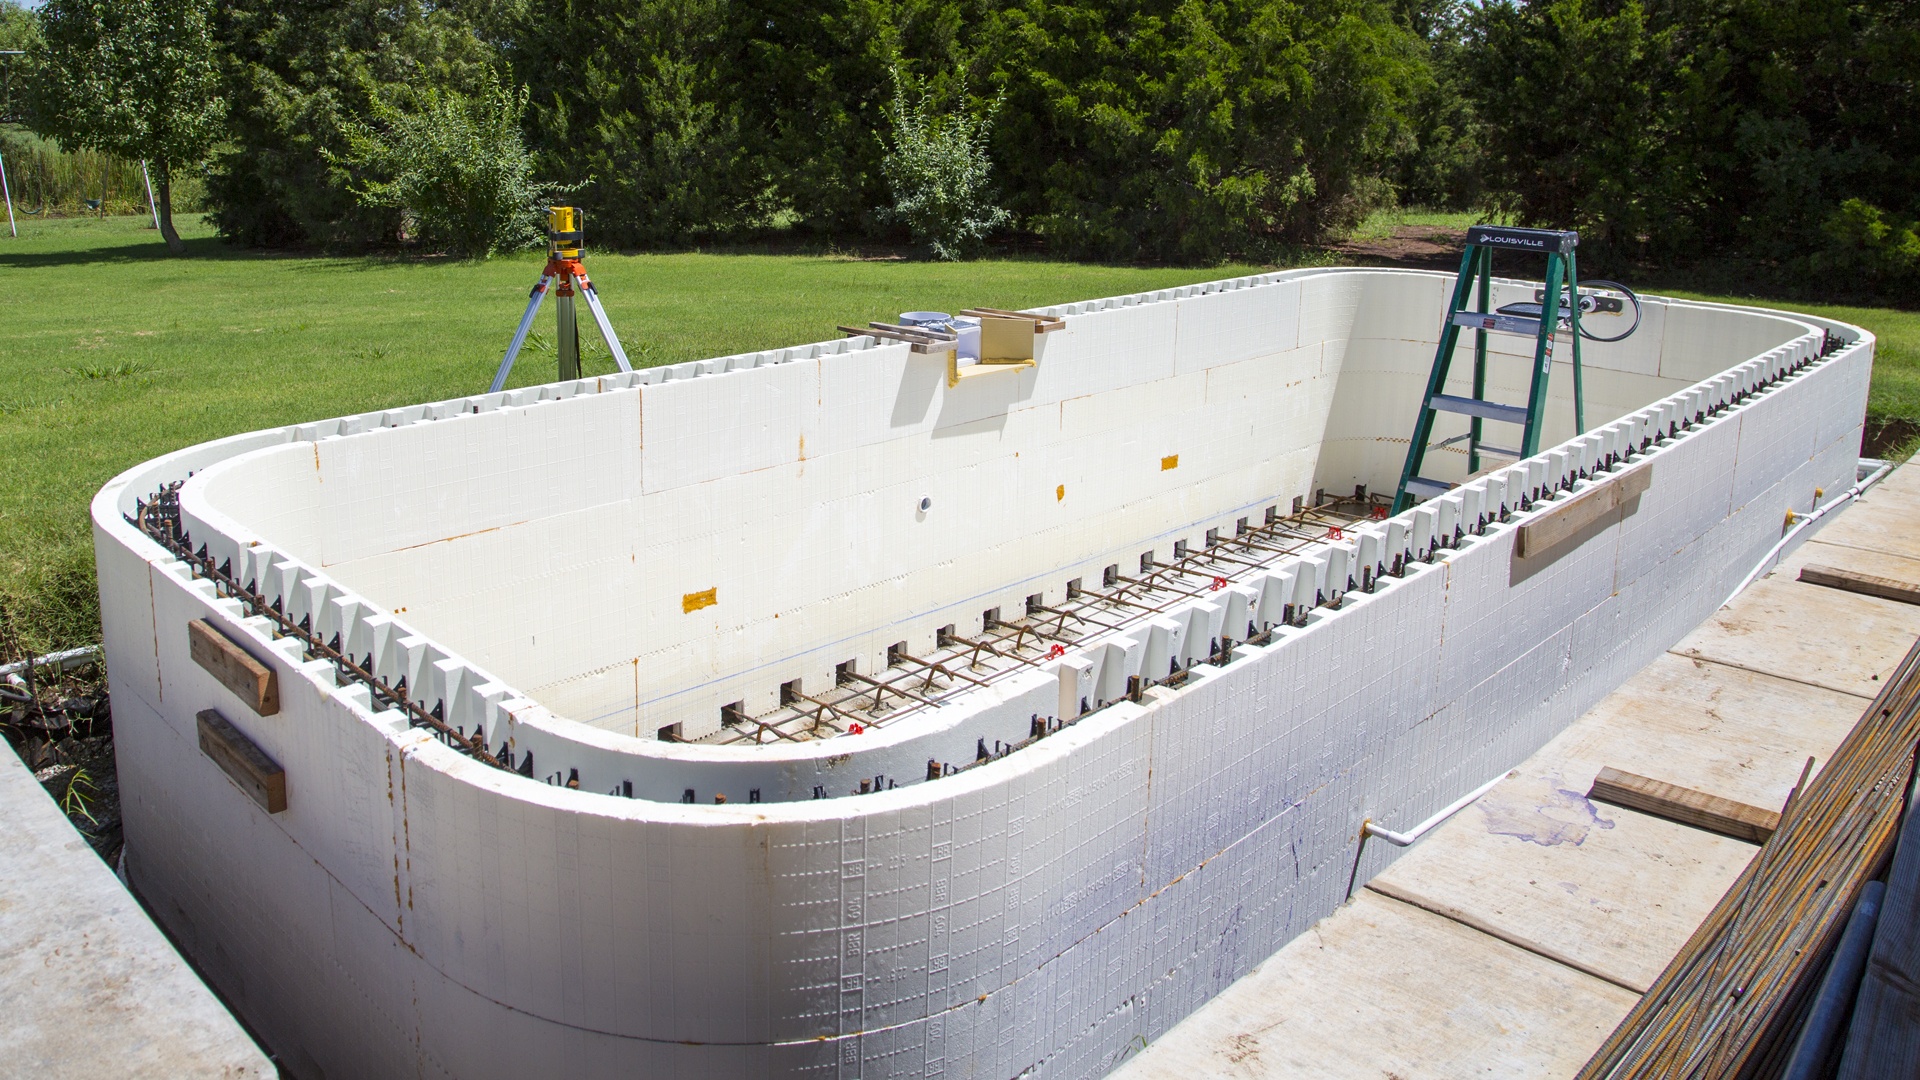 Why ICF Pools - Build with ICFs to Save Time and Money